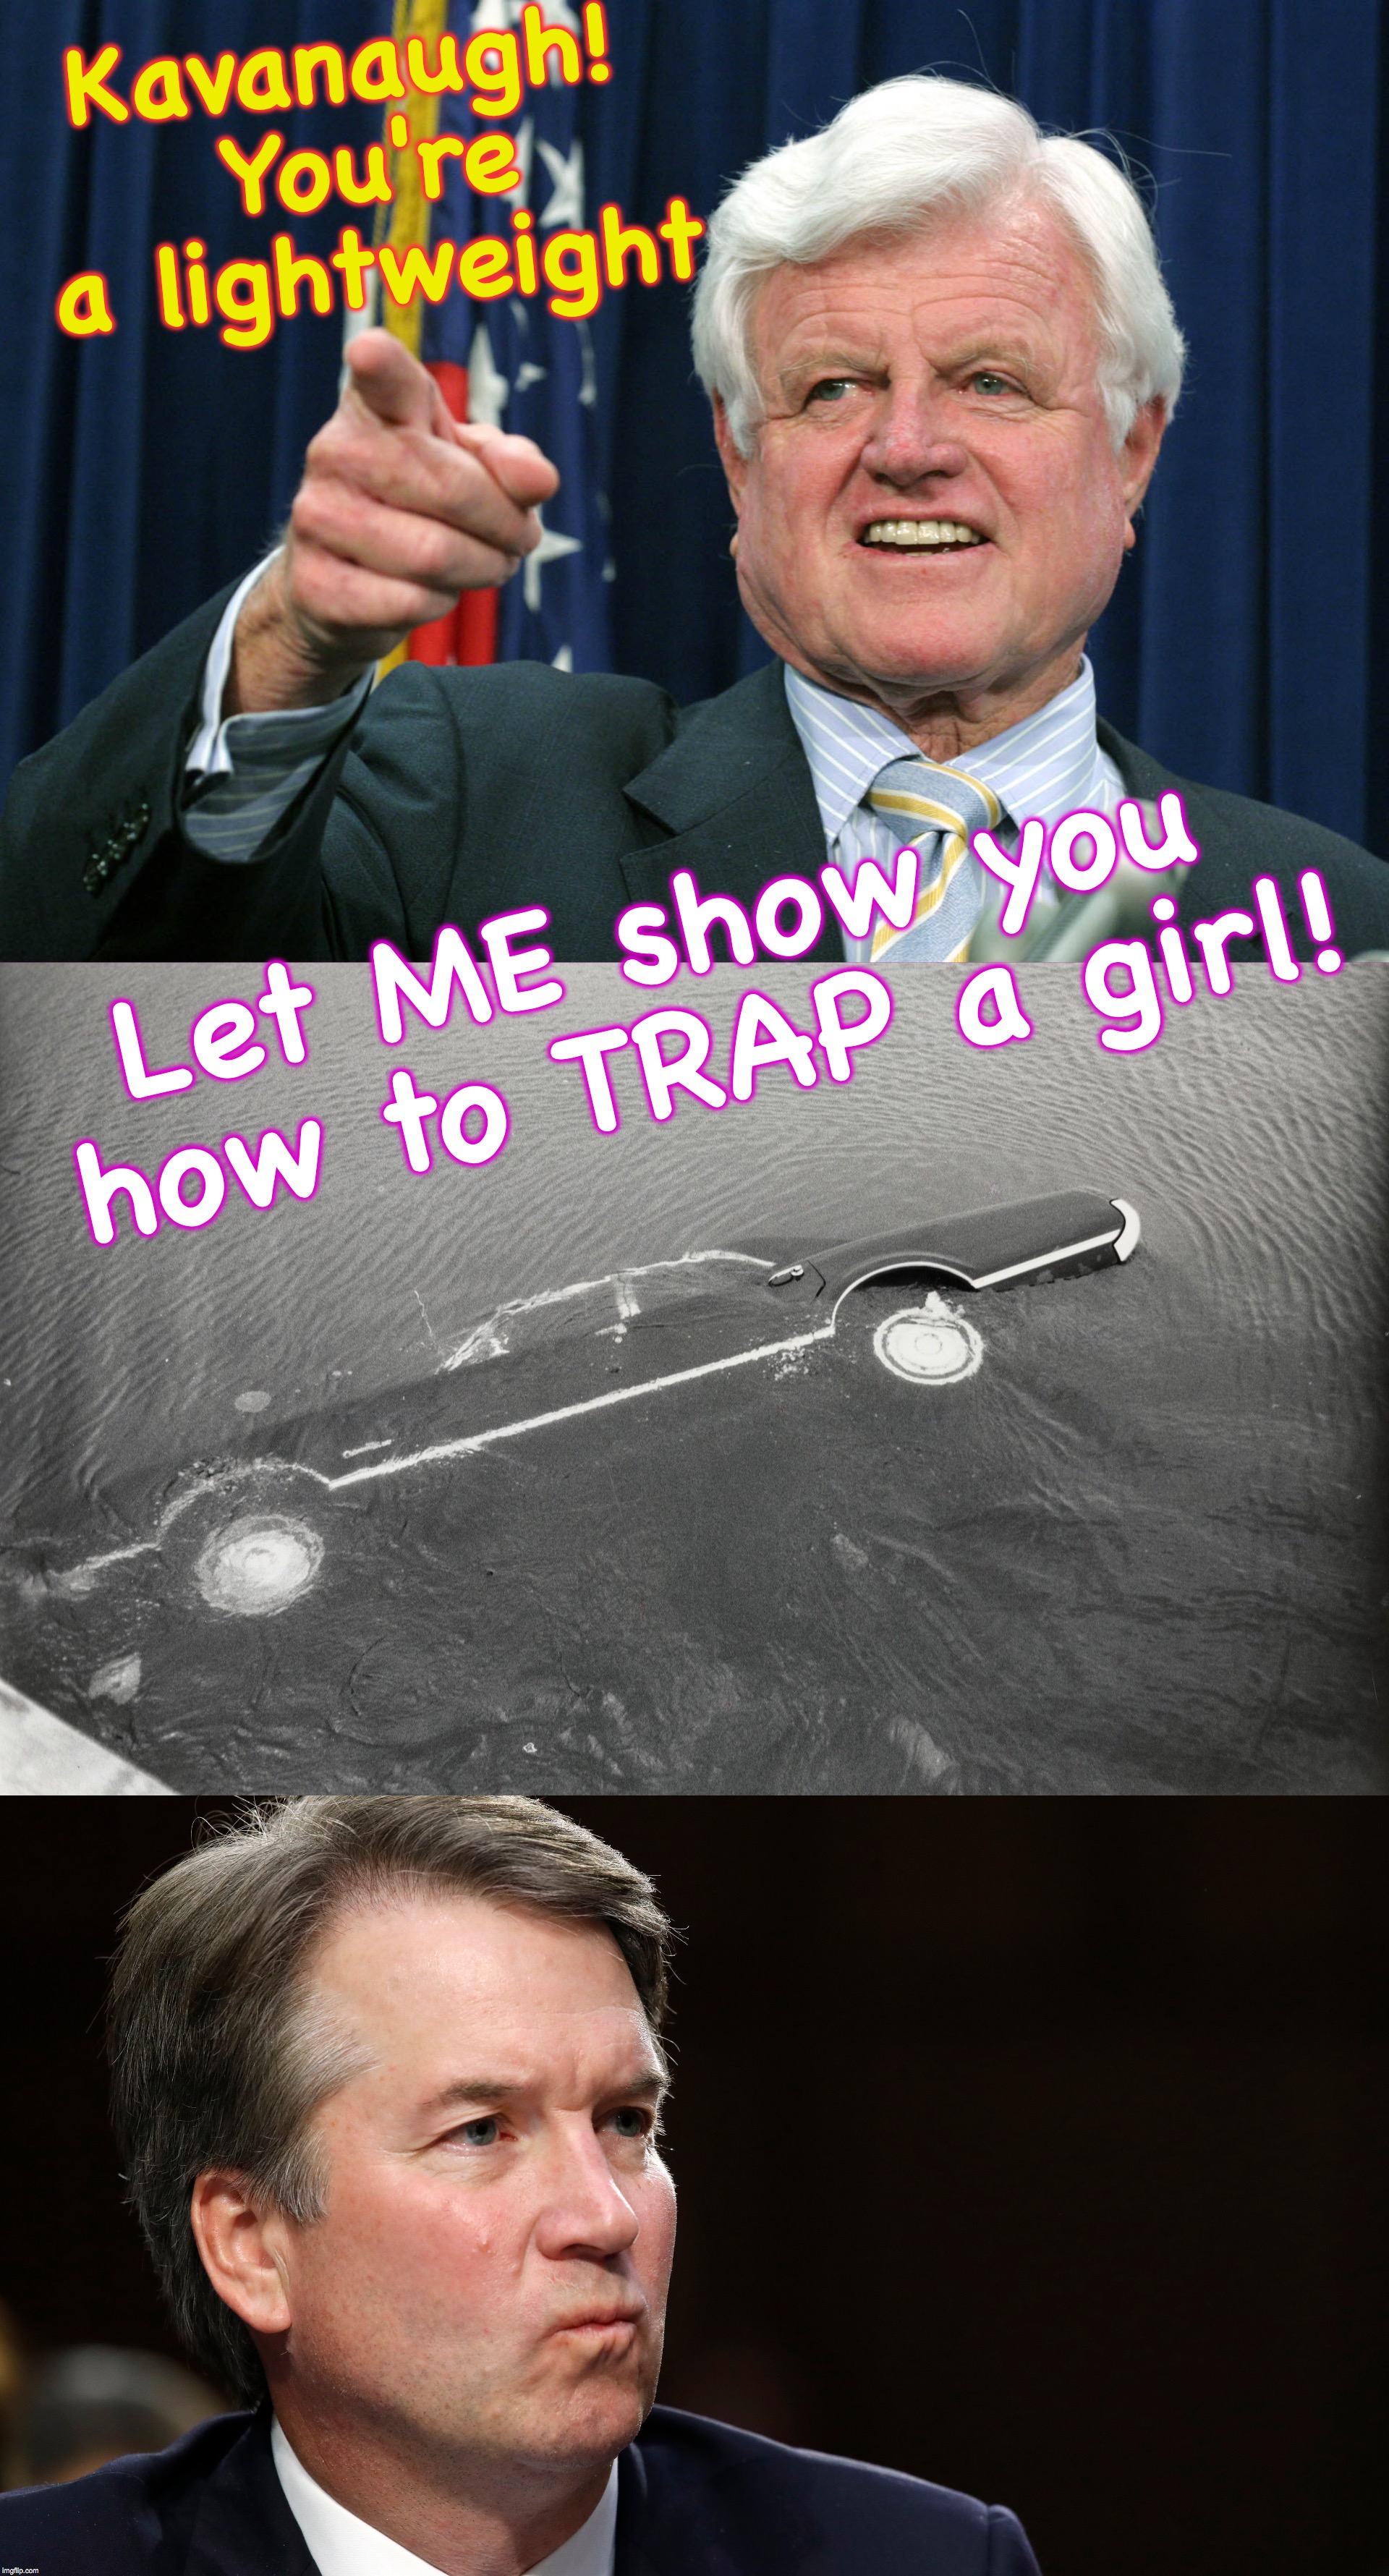  Kavanaugh! You're a lightweight; Let ME show you how to TRAP a girl! | image tagged in kennedy,trap | made w/ Imgflip meme maker